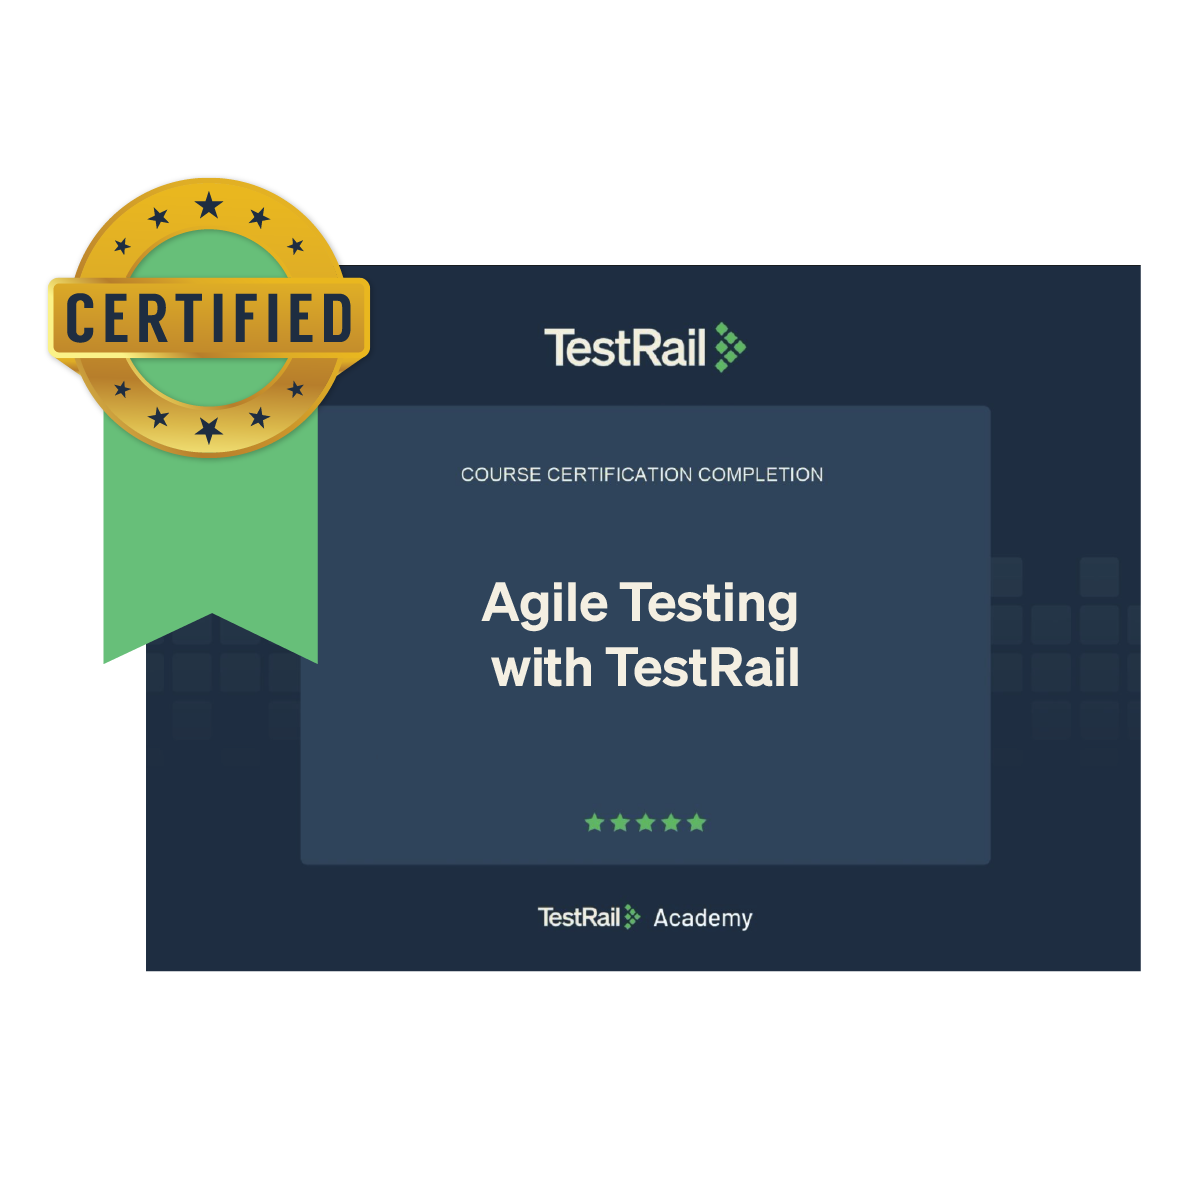 Agile Testing with TestRail